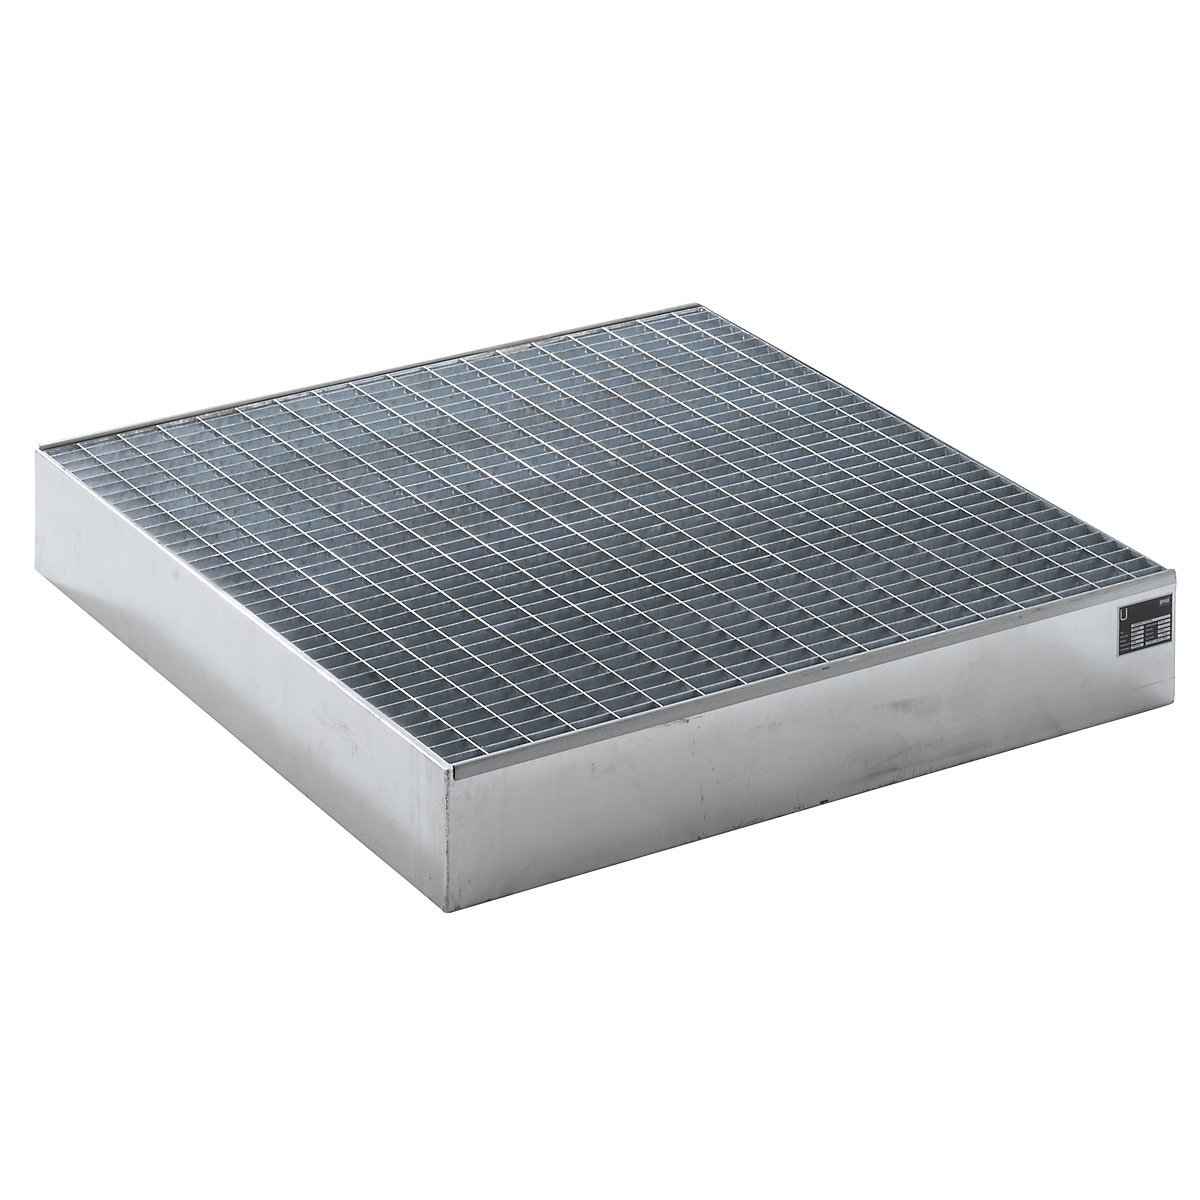 EUROKRAFTbasic – Pallet sump tray, LxWxH 1200 x 1200 x 185 mm, hot dip galvanised, with grate